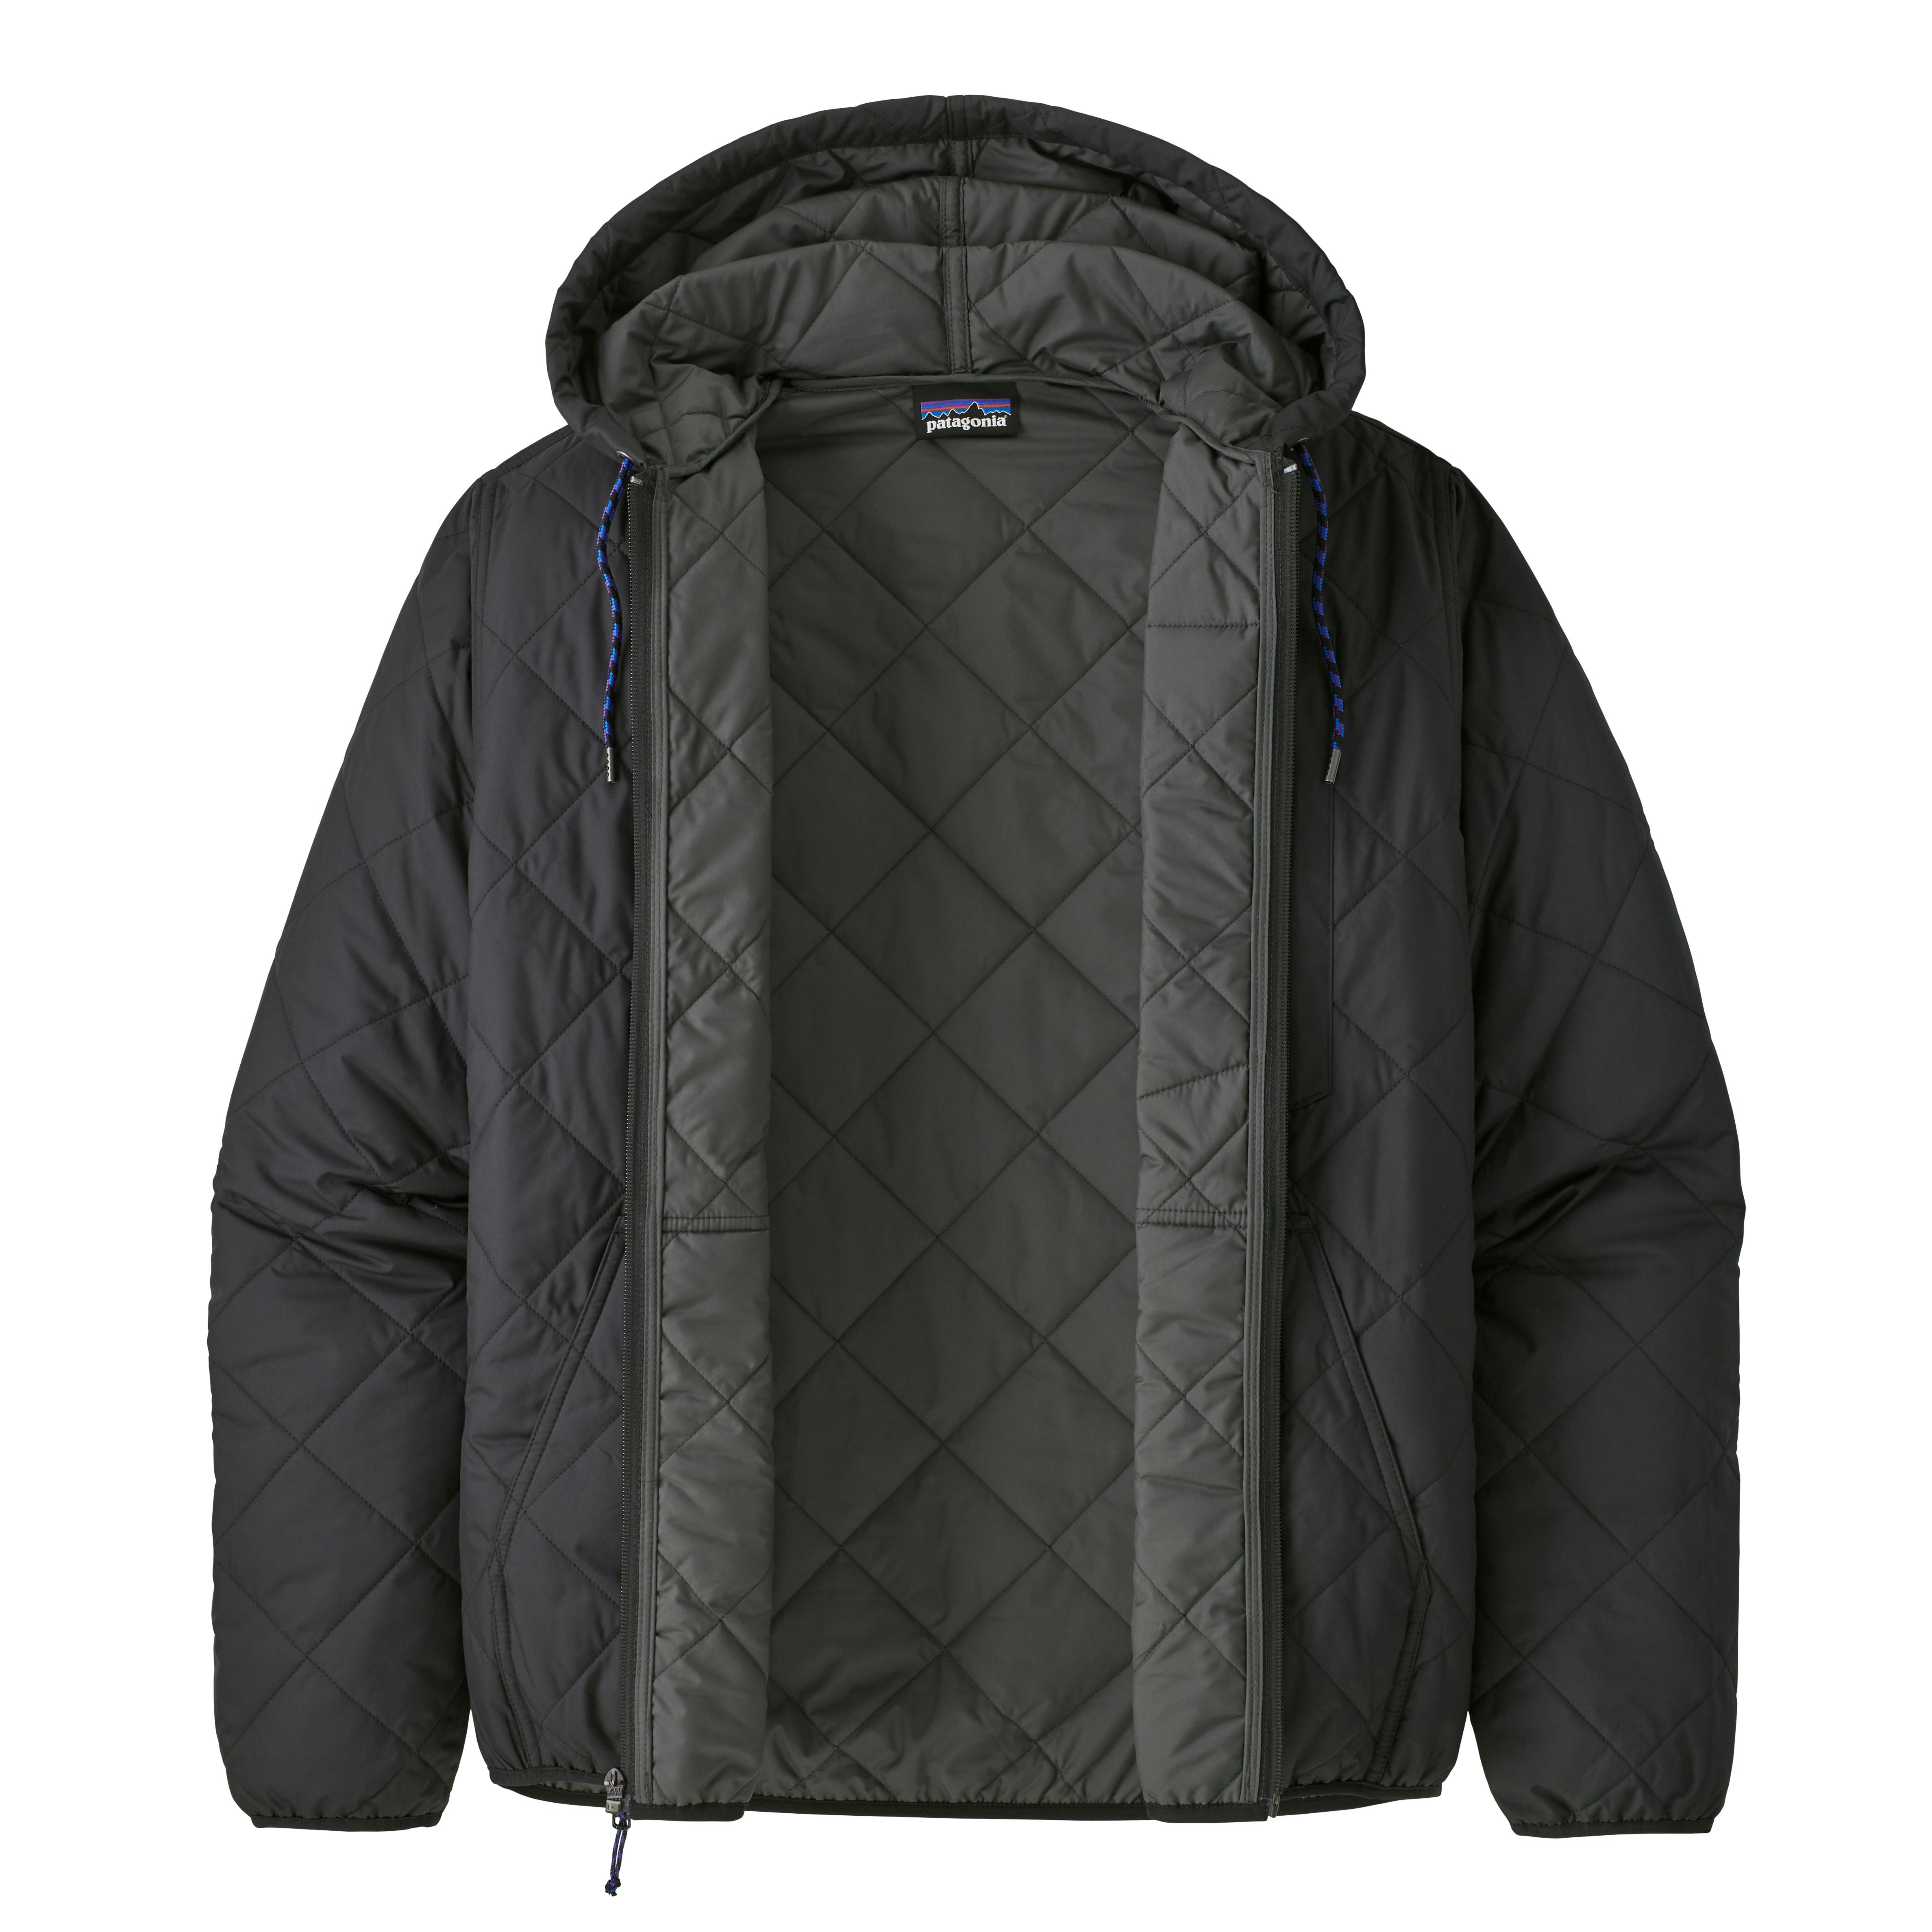 Patagonia Diamond Quilted Bomber Hoodie